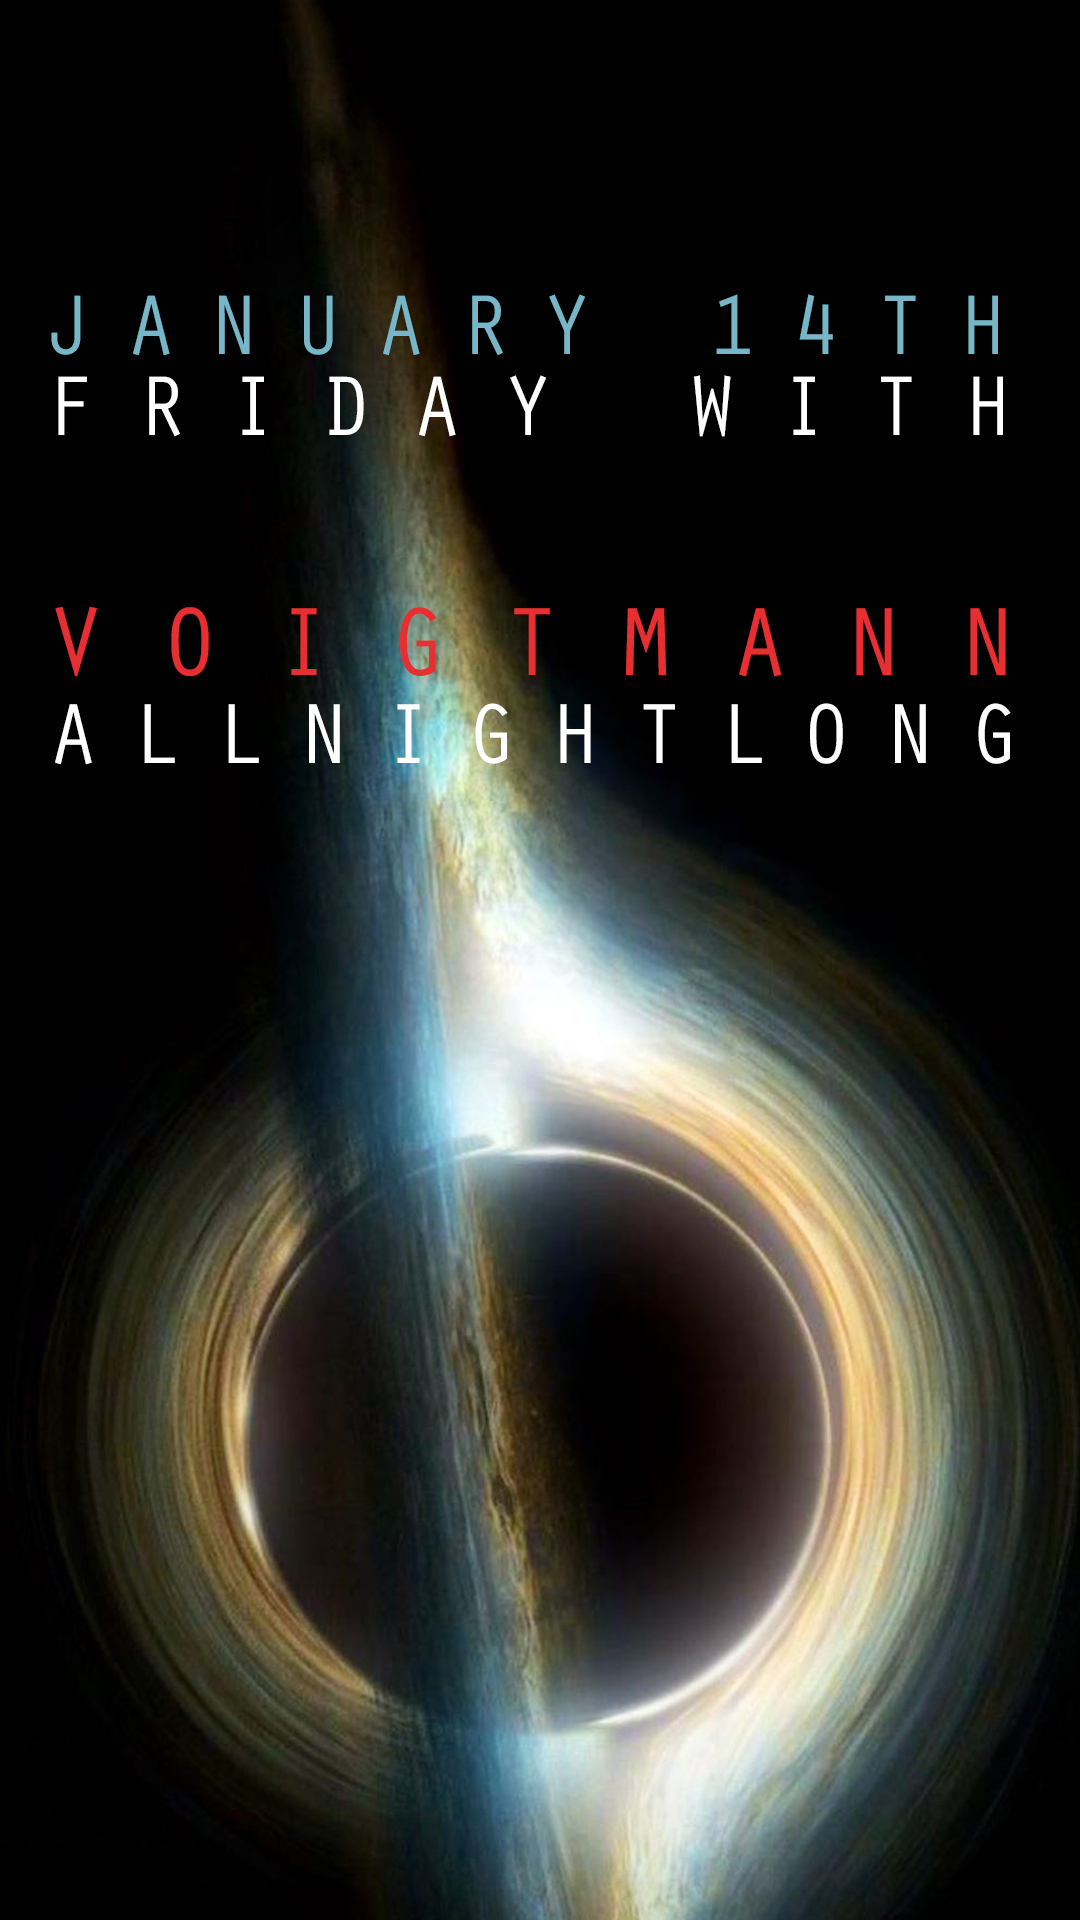 A Friday with Voigtmann all night long - Flyer back